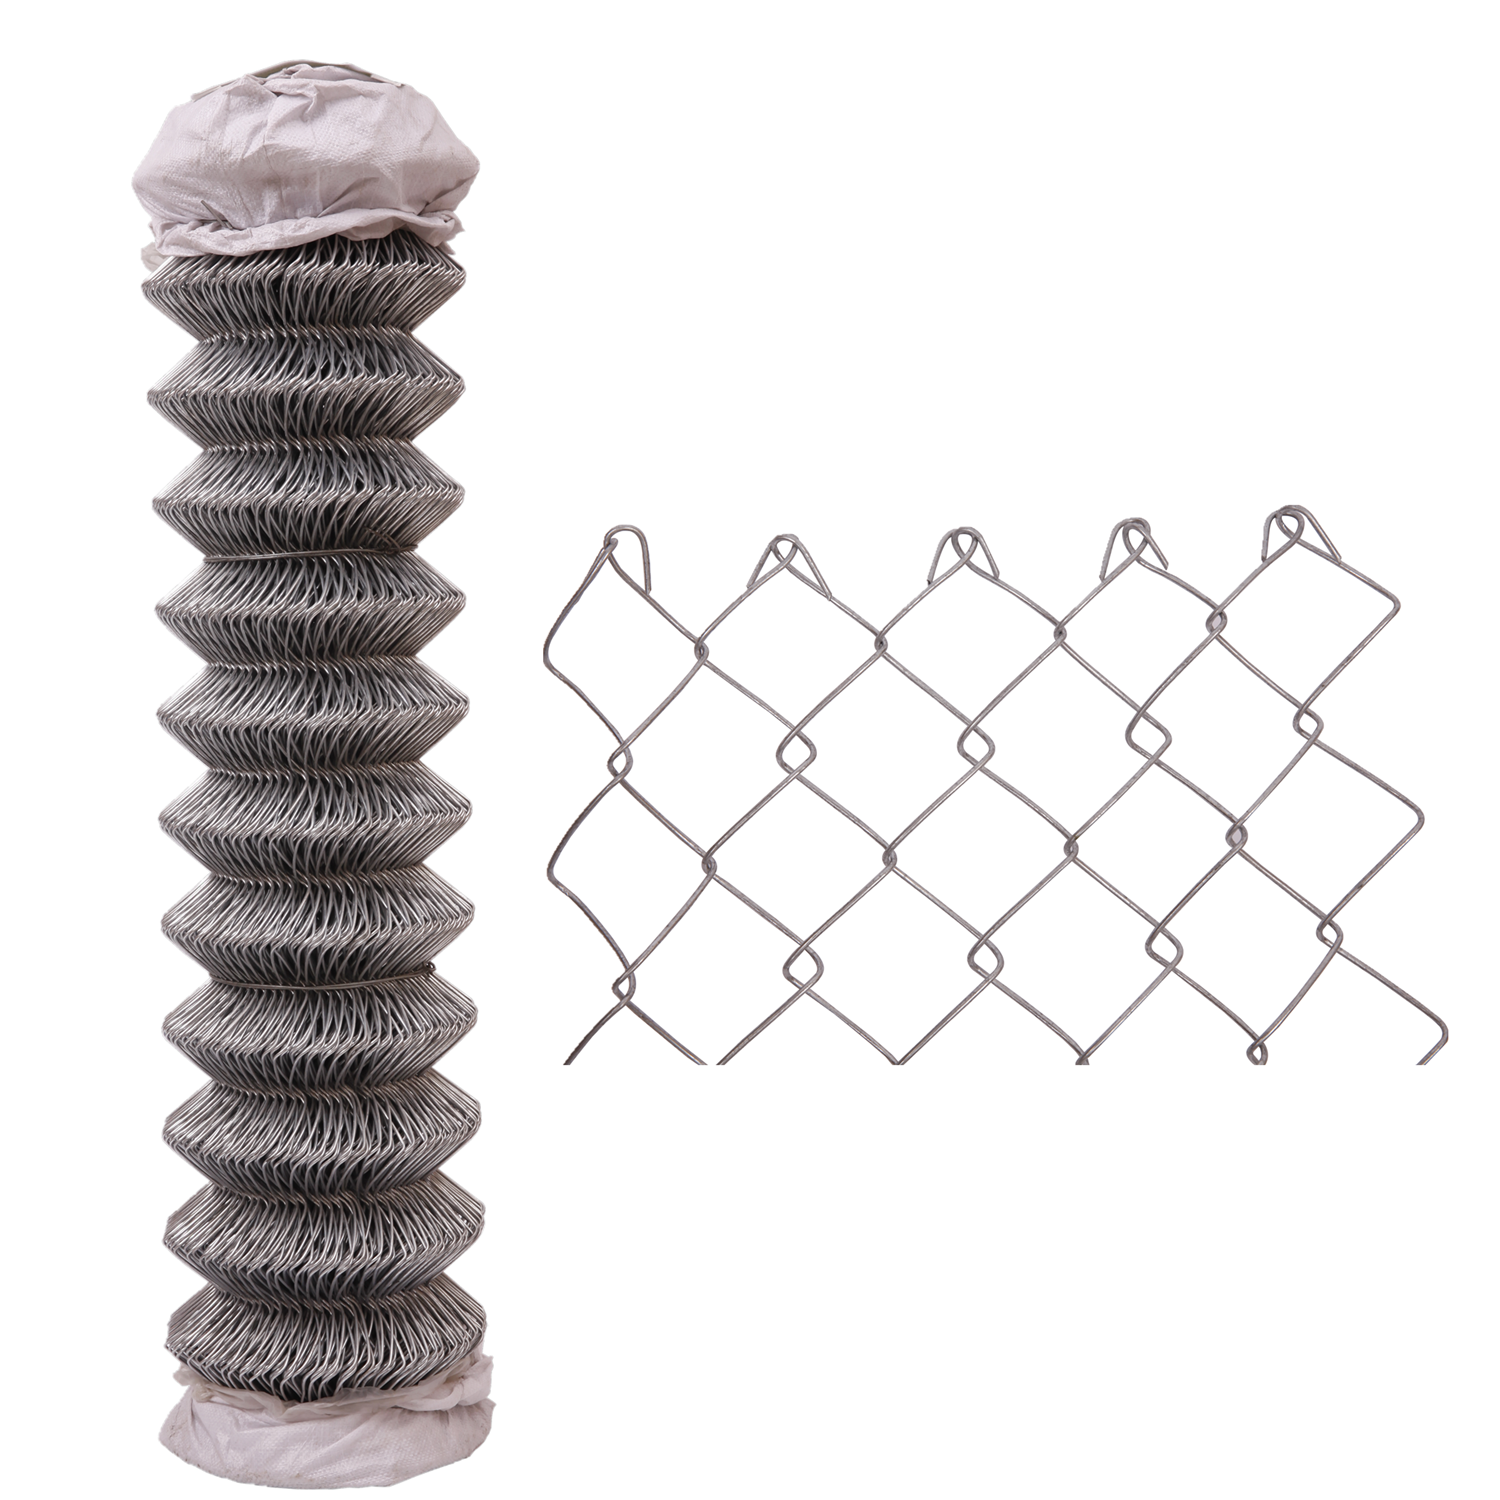 Hot Dipped Galvanized Chain Link Fencing